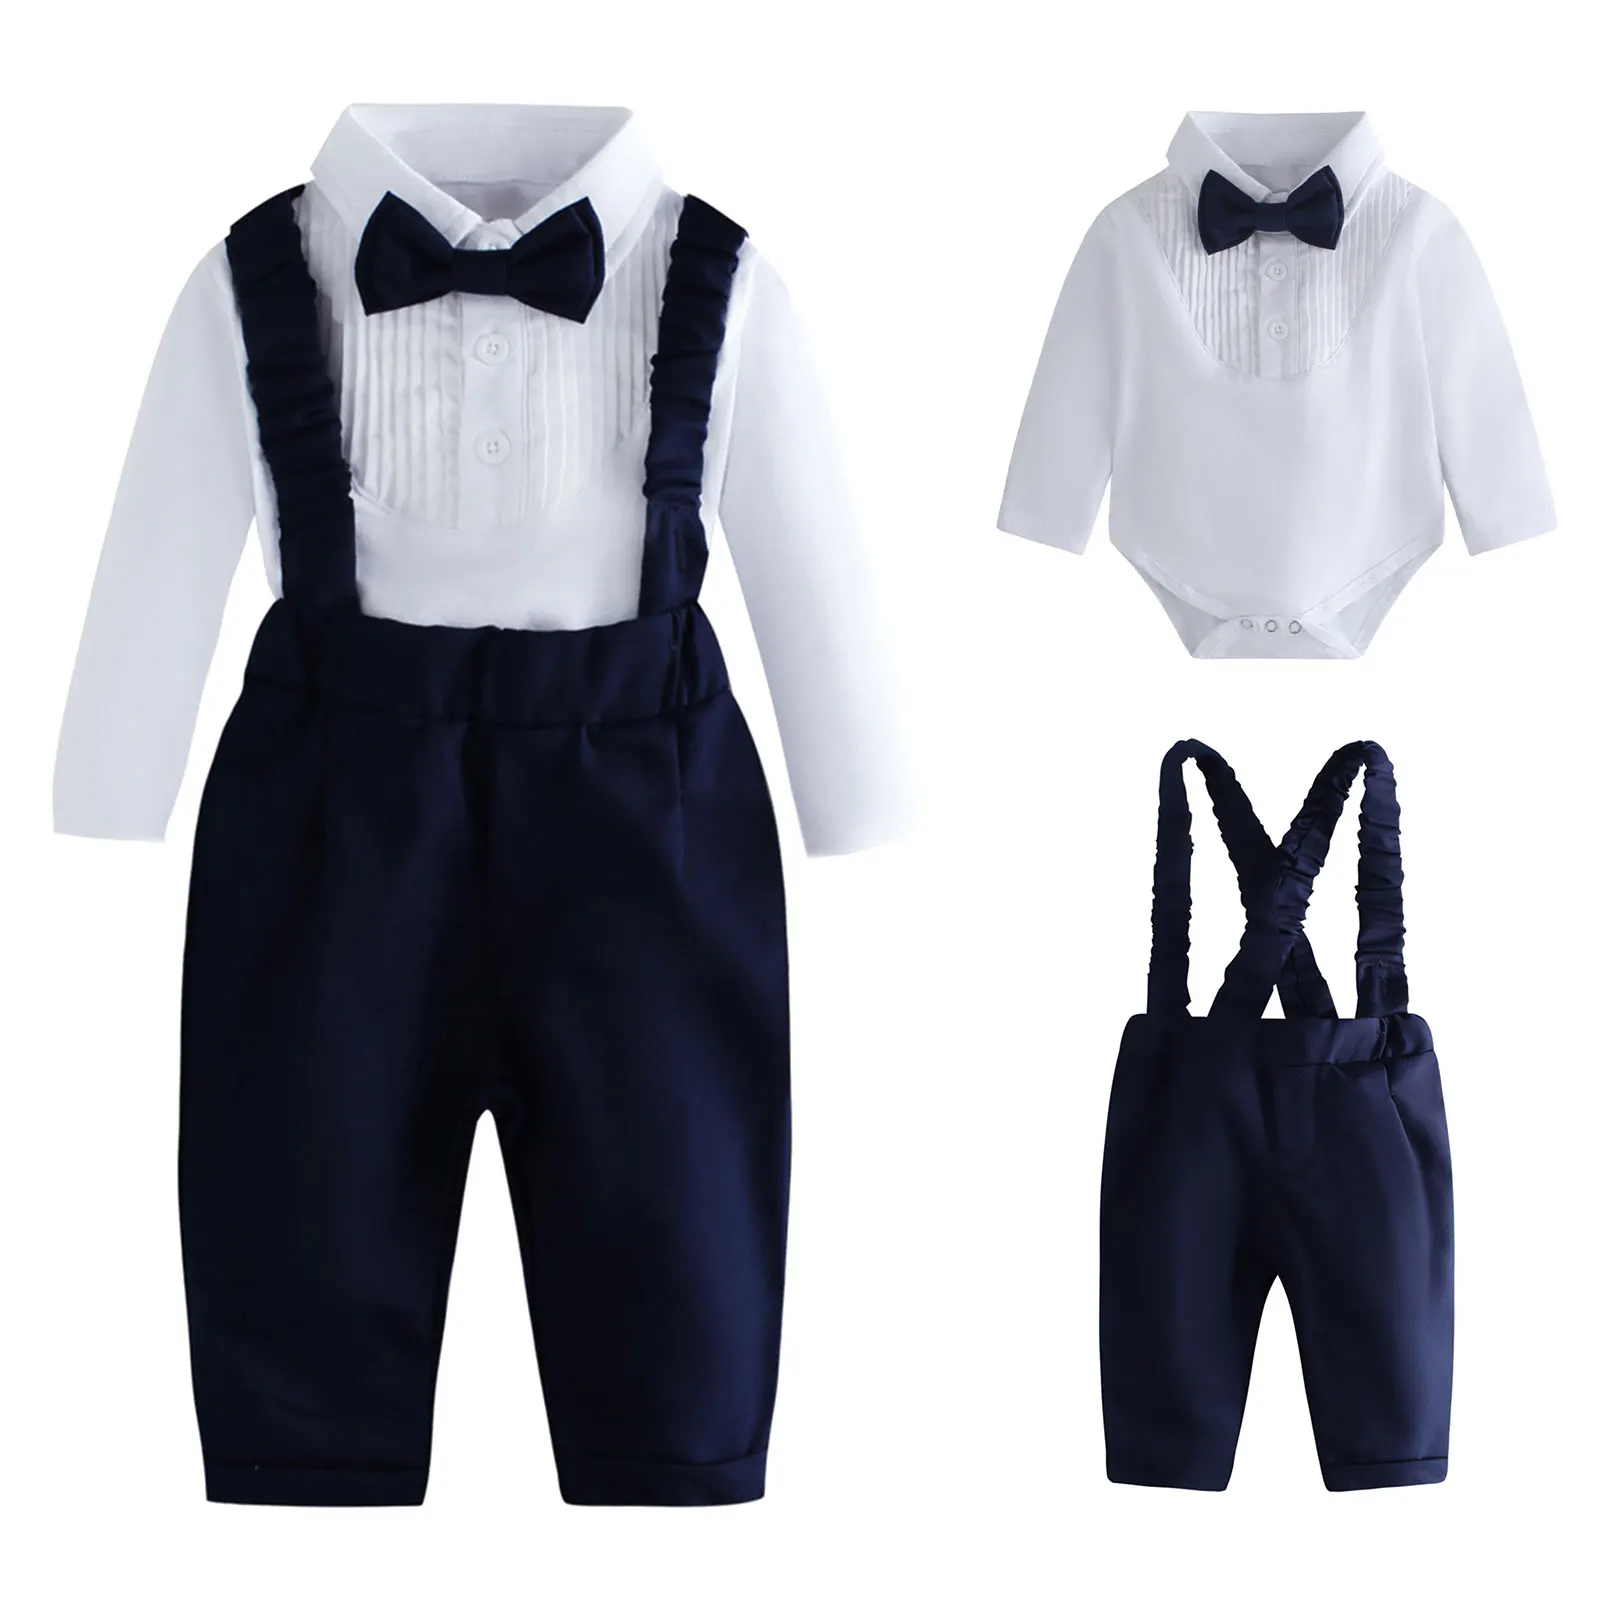 

TiaoBug Baby Boys Outfit Set Gentleman Formal Suit Long Sleeve Romper with Bow Ruched Suspender Pants for Christening Birthday